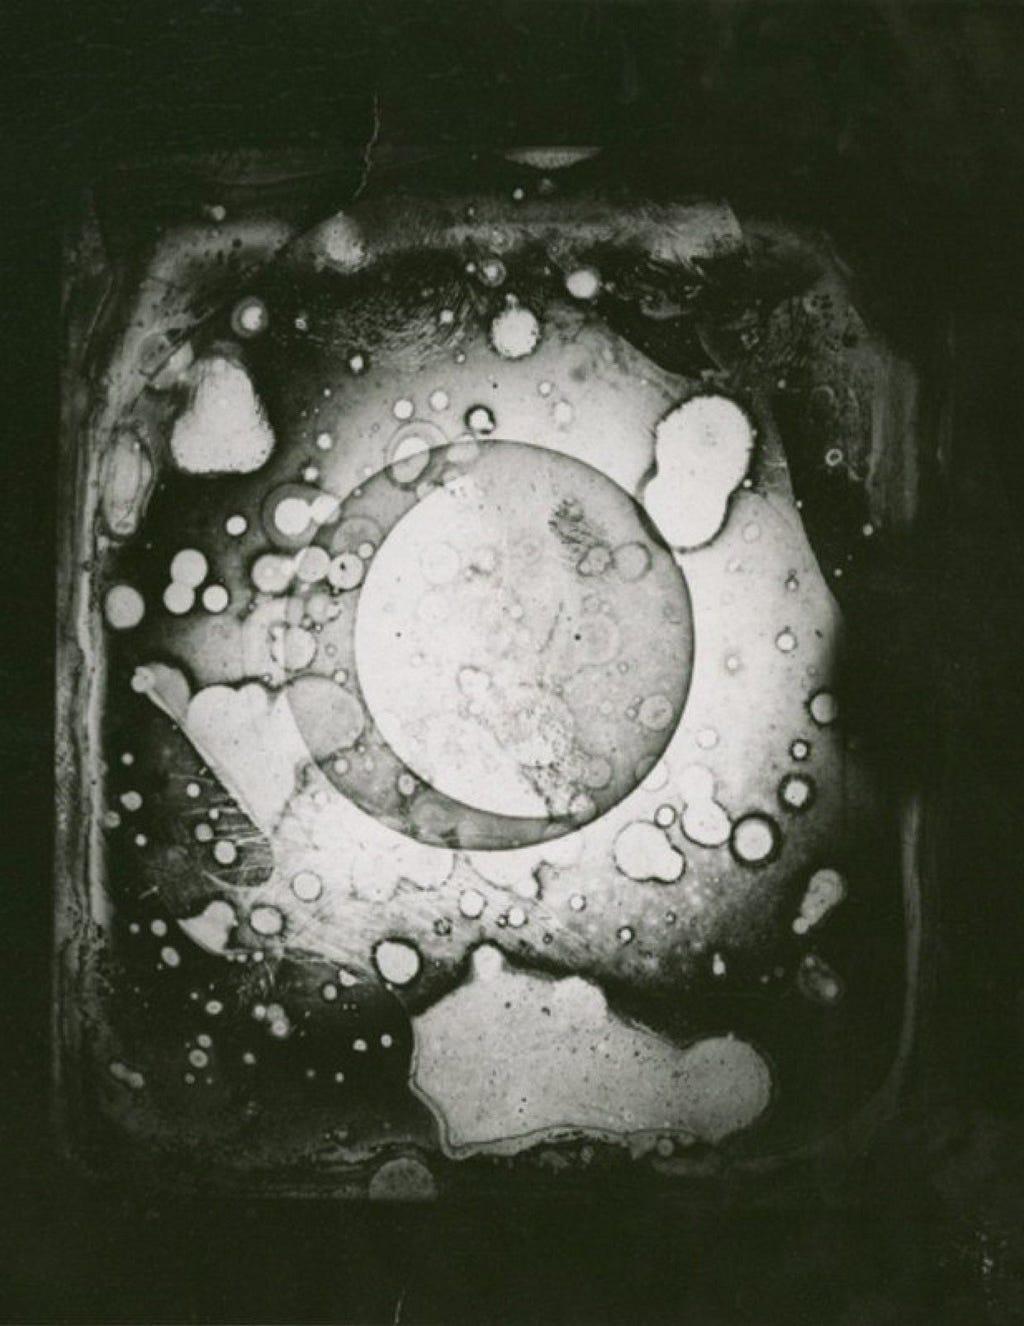 The Earliest Ever Photograph of a Body Space. Image by:John William Draper — http://gvh.aphdigital.org/items/show/119